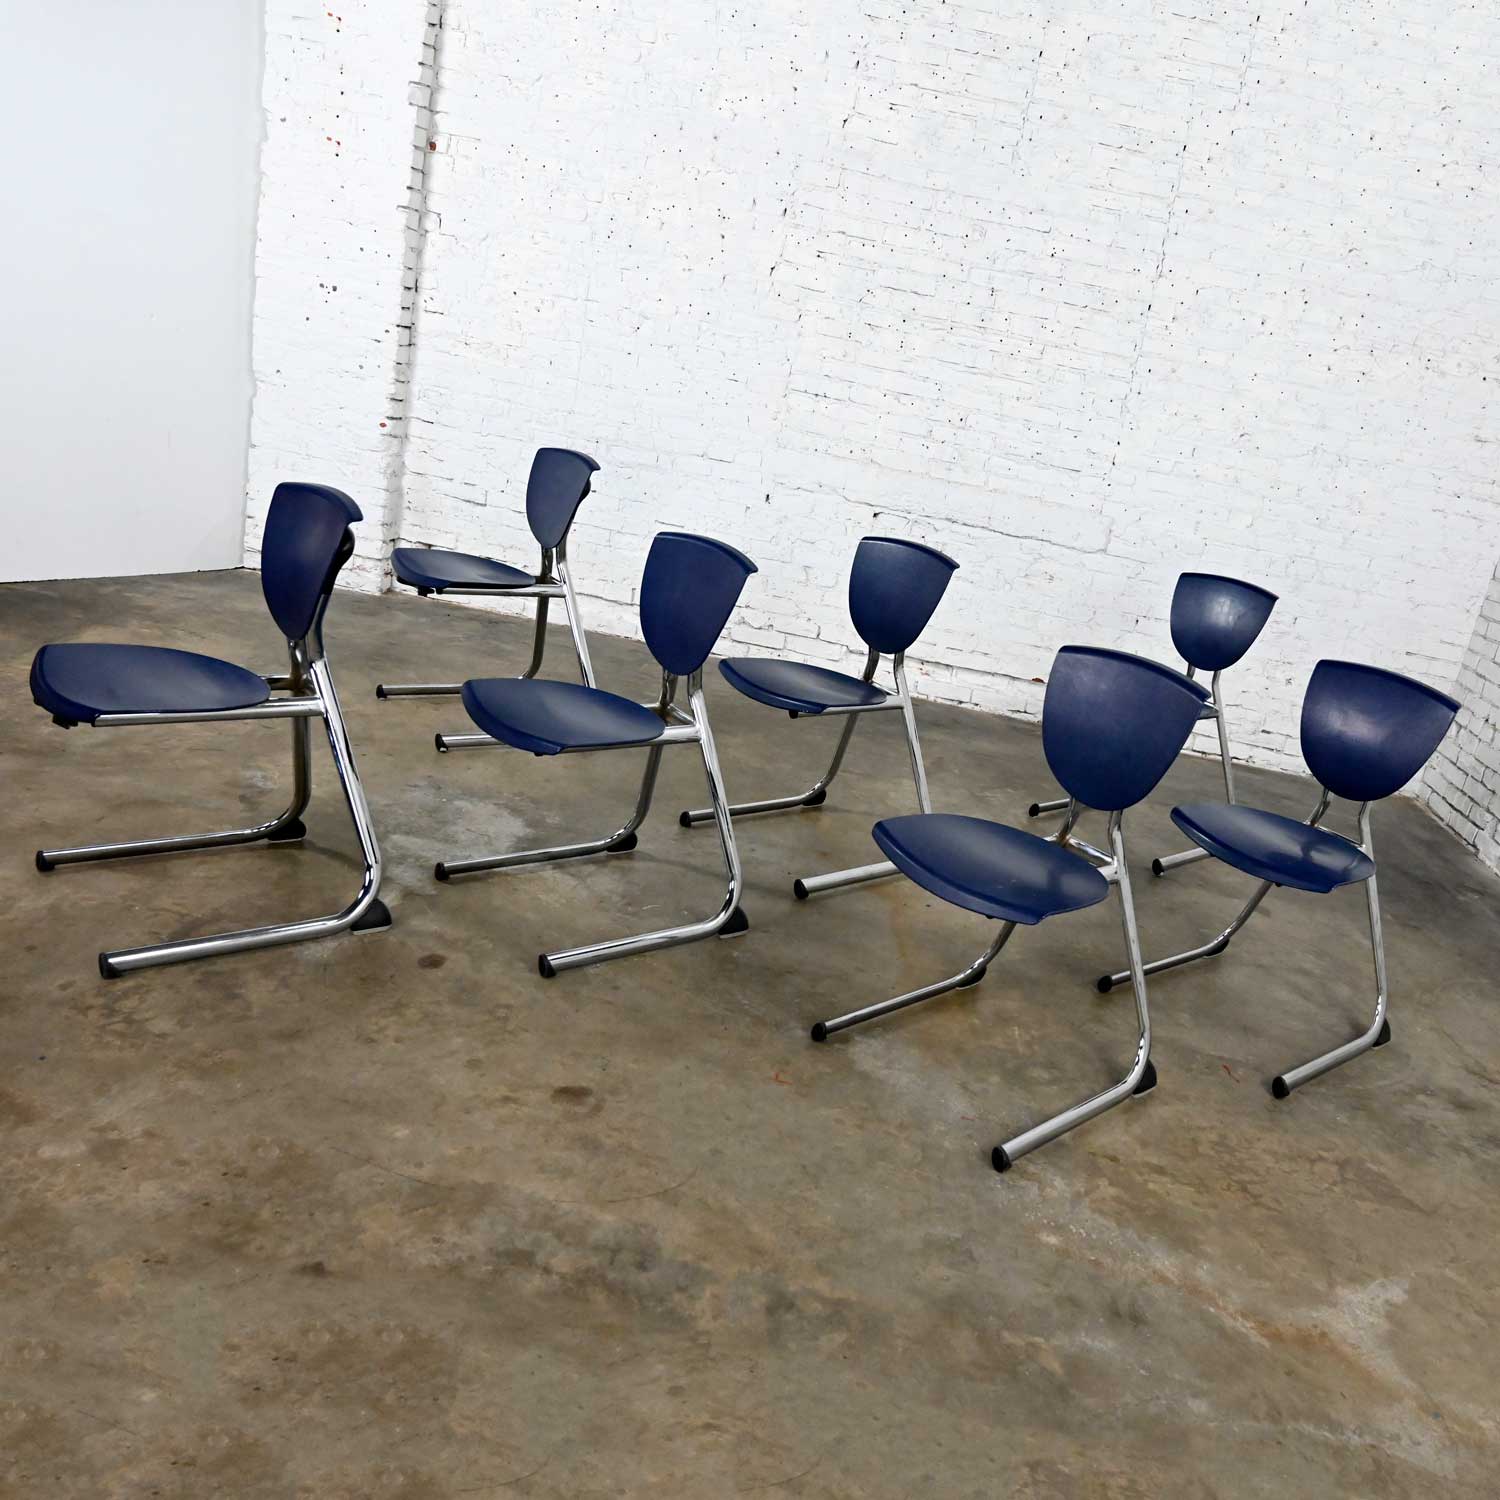 7 Vintage Modern Dark Blue Plastic & Chrome Reverse Cantilever Stacking Intellect Dining Chairs by KI Seating